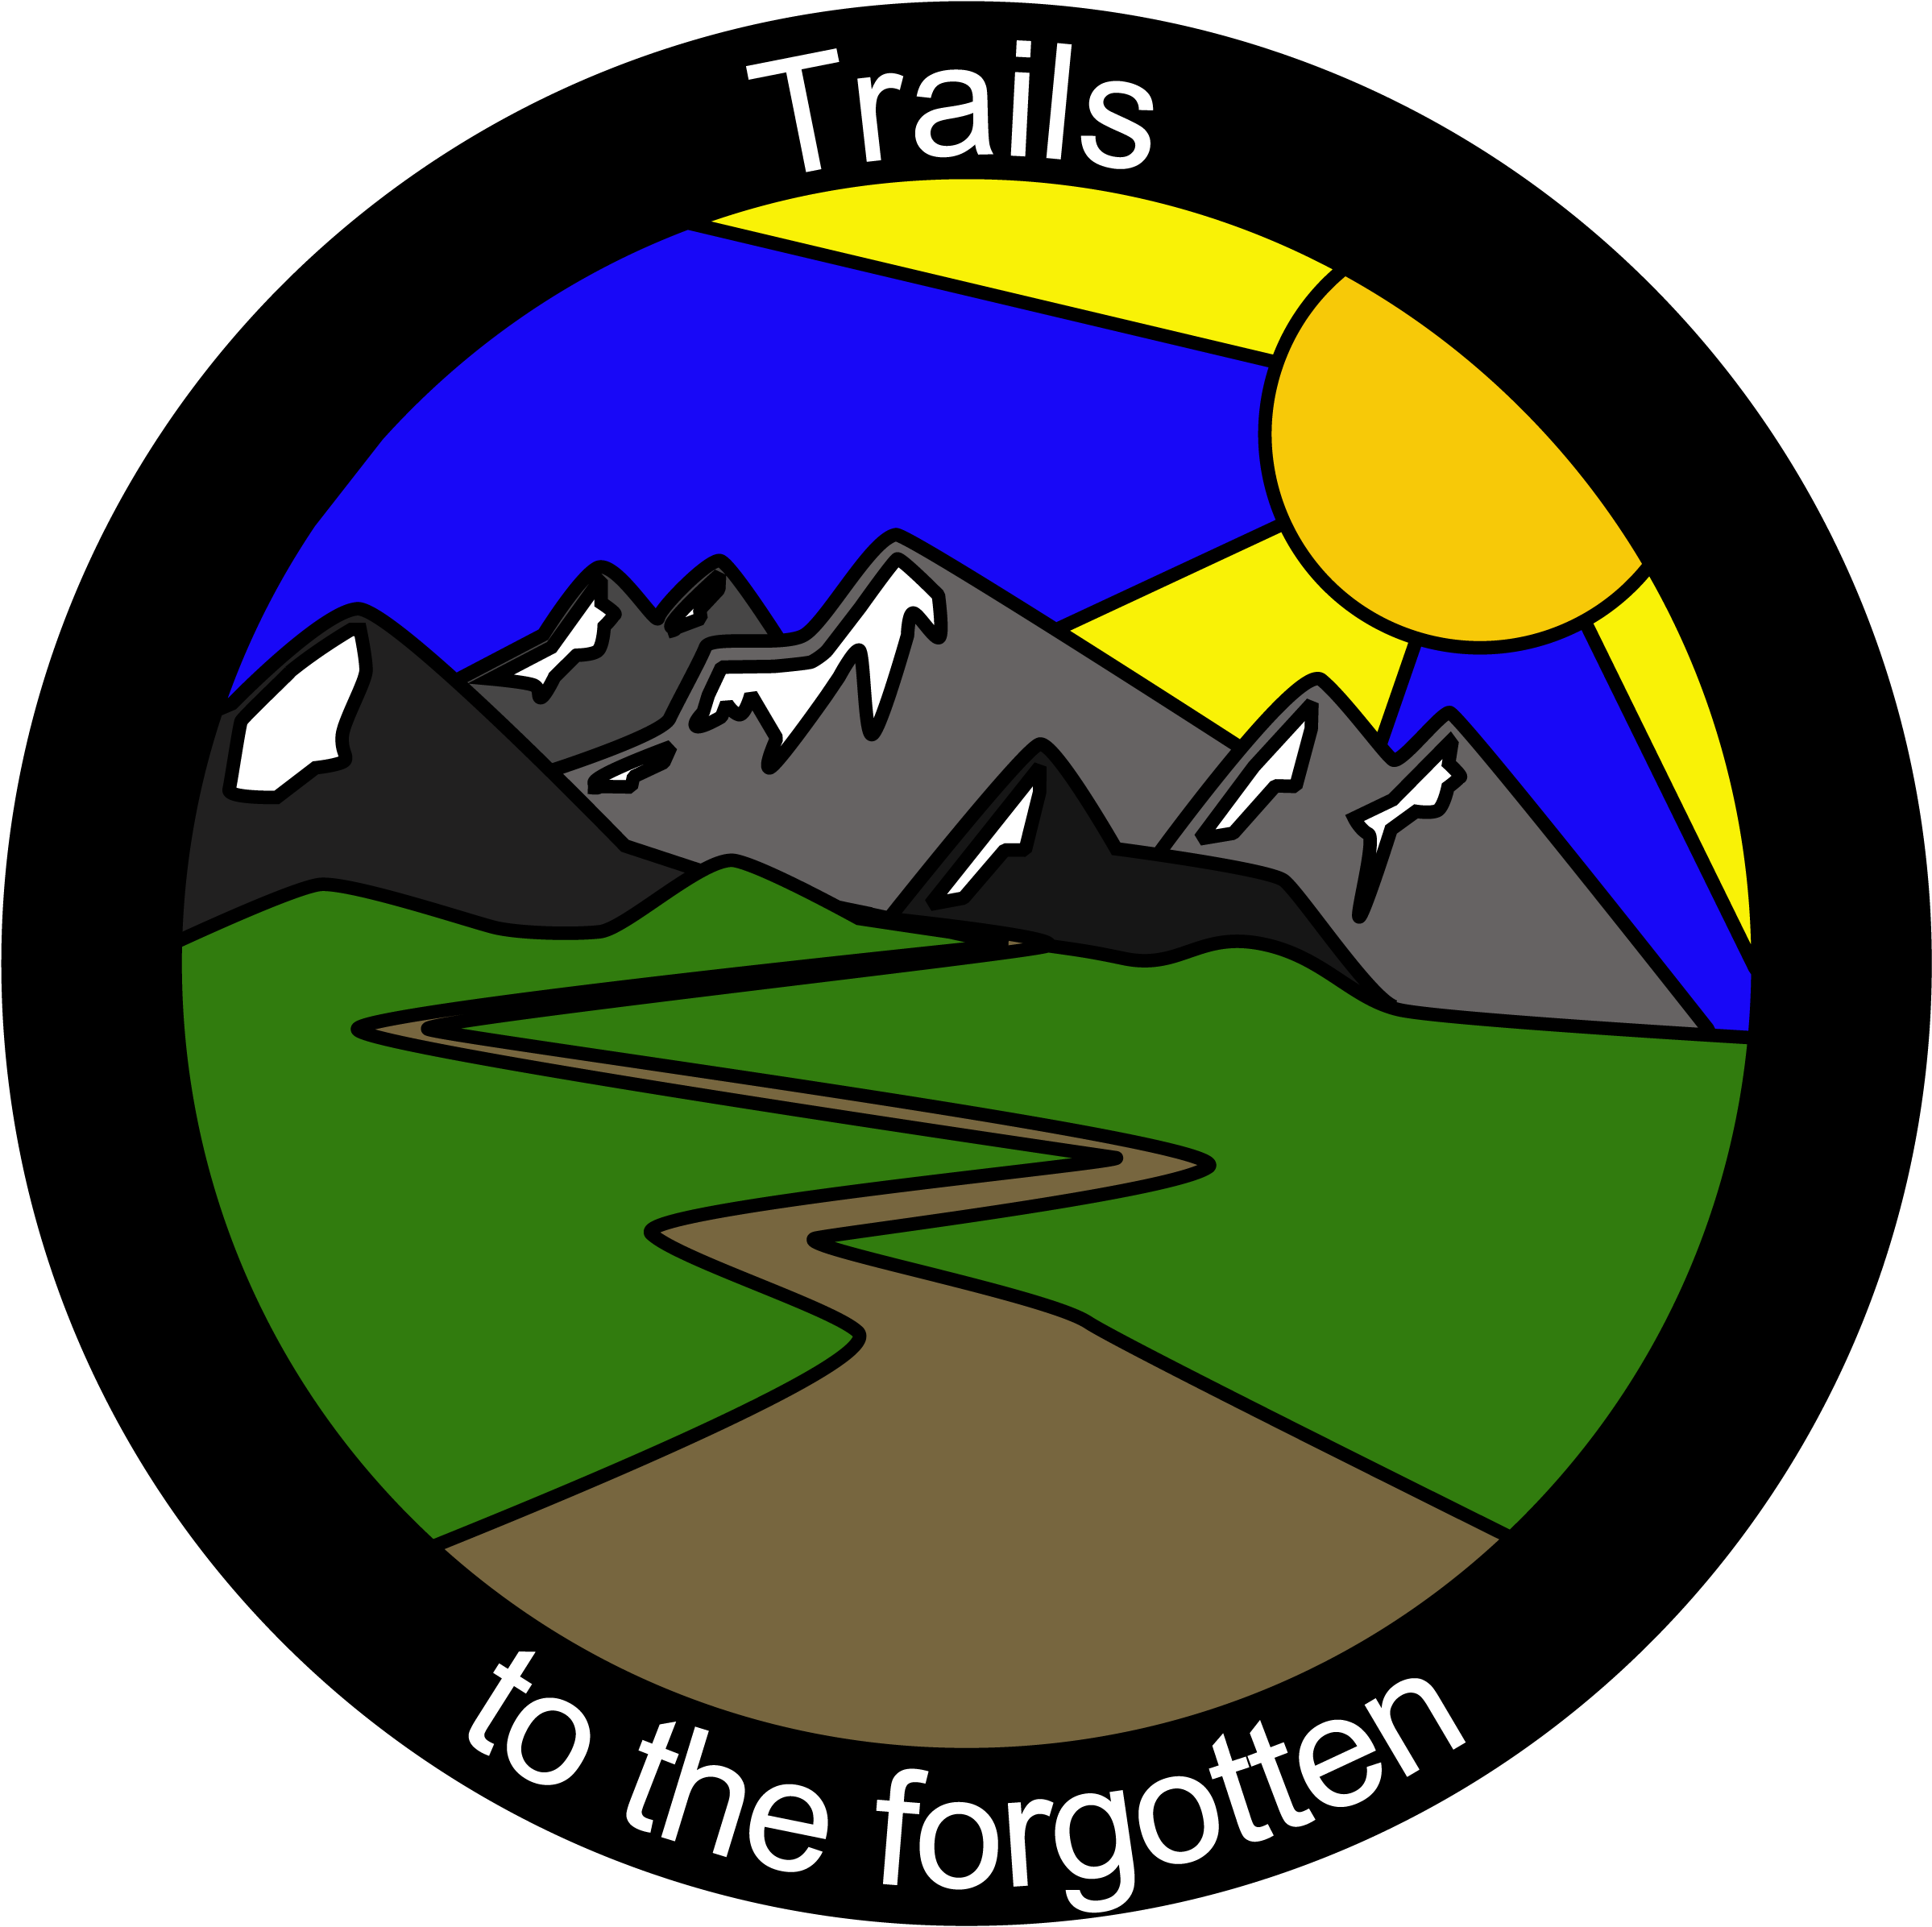 Trails to the Forgotten